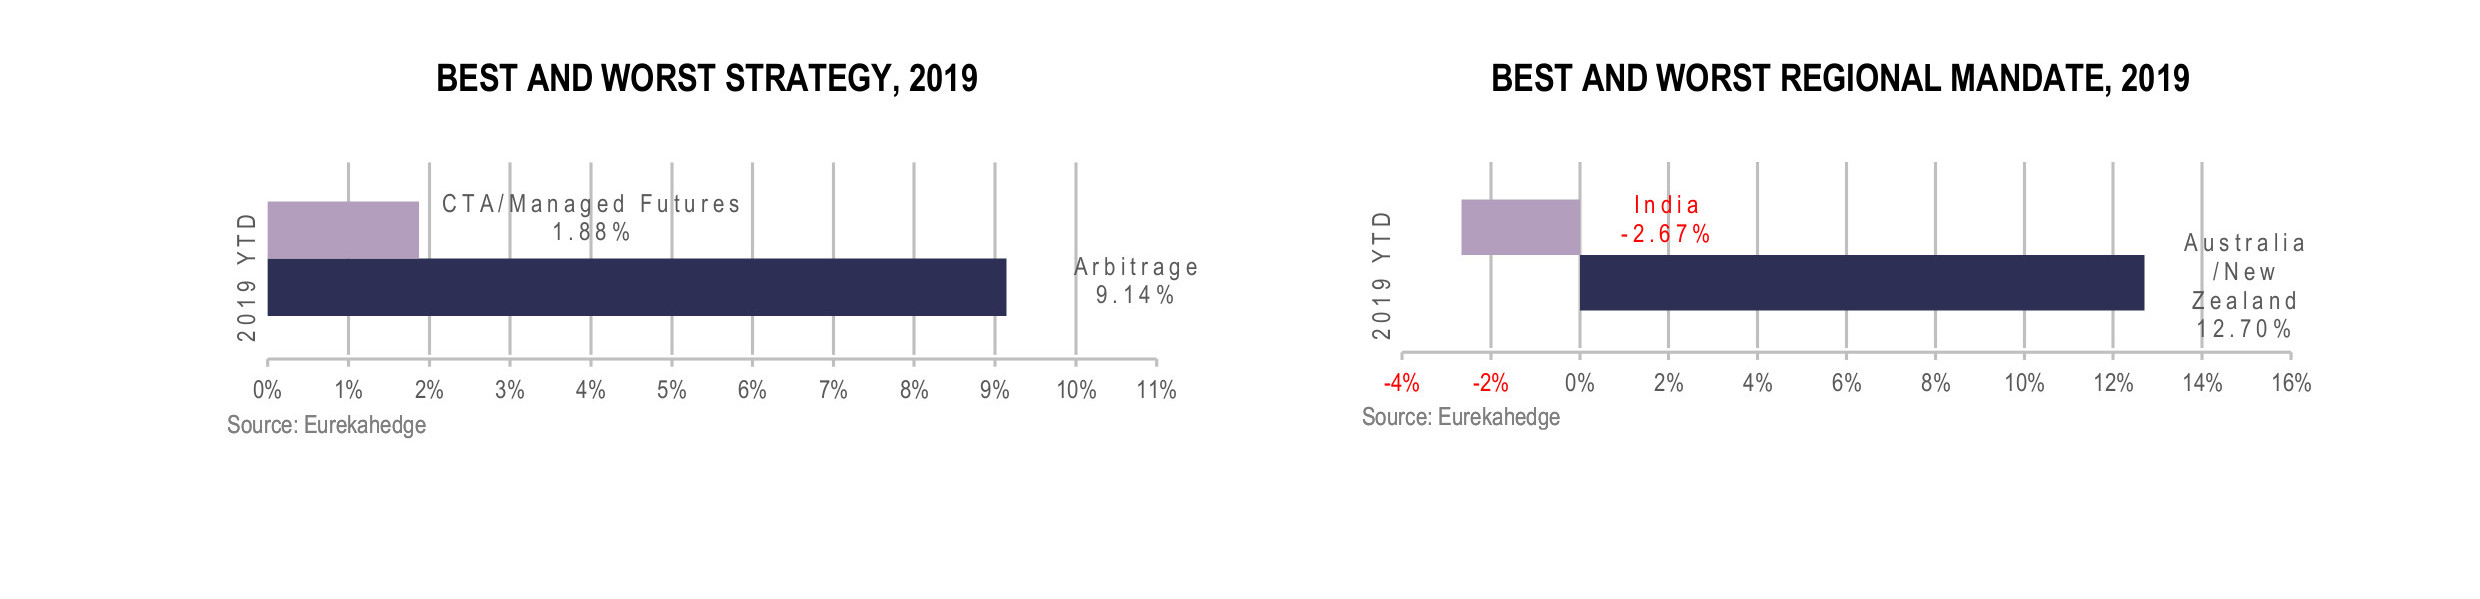 Asian Hedge Funds Infographic September 2019 - best and worst strategy and regional mandate 2019